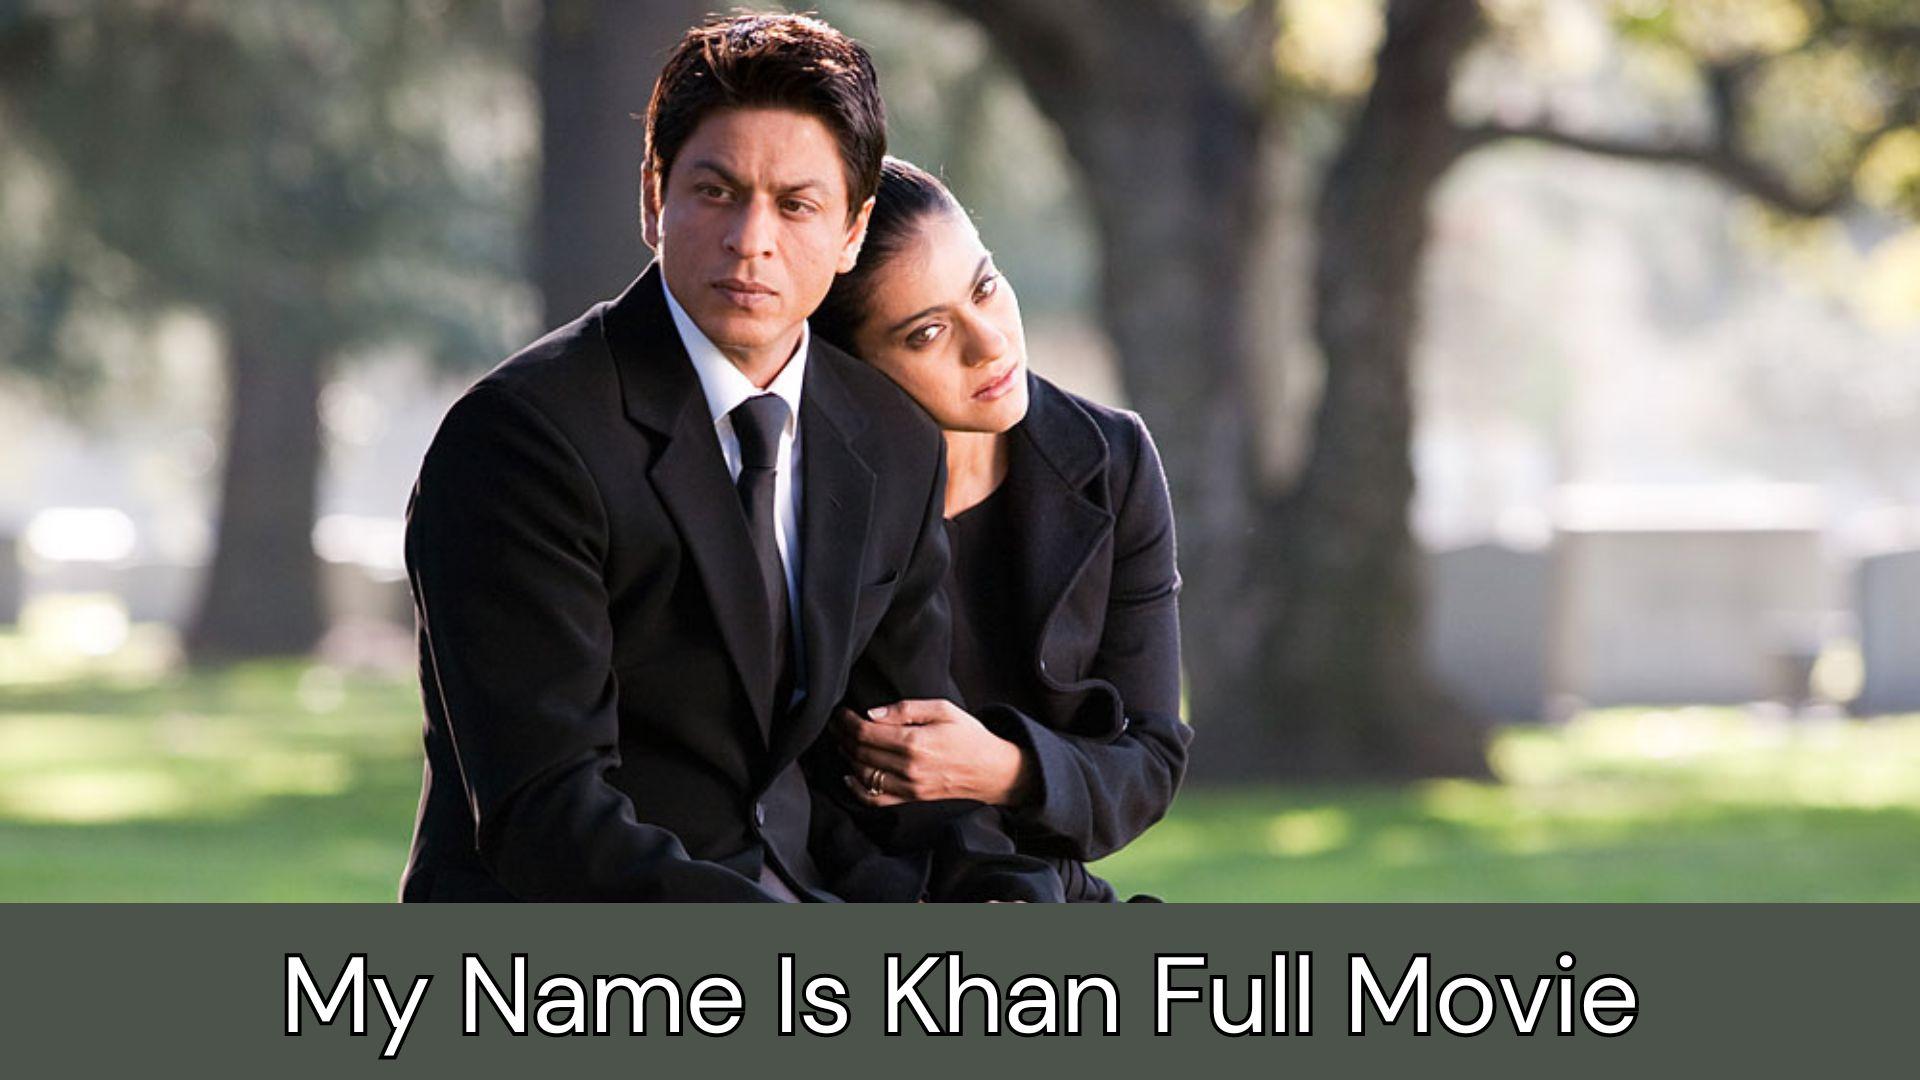 My Name Is Khan Full Movie Cast, OTT, Review, Budget, Shooting Location